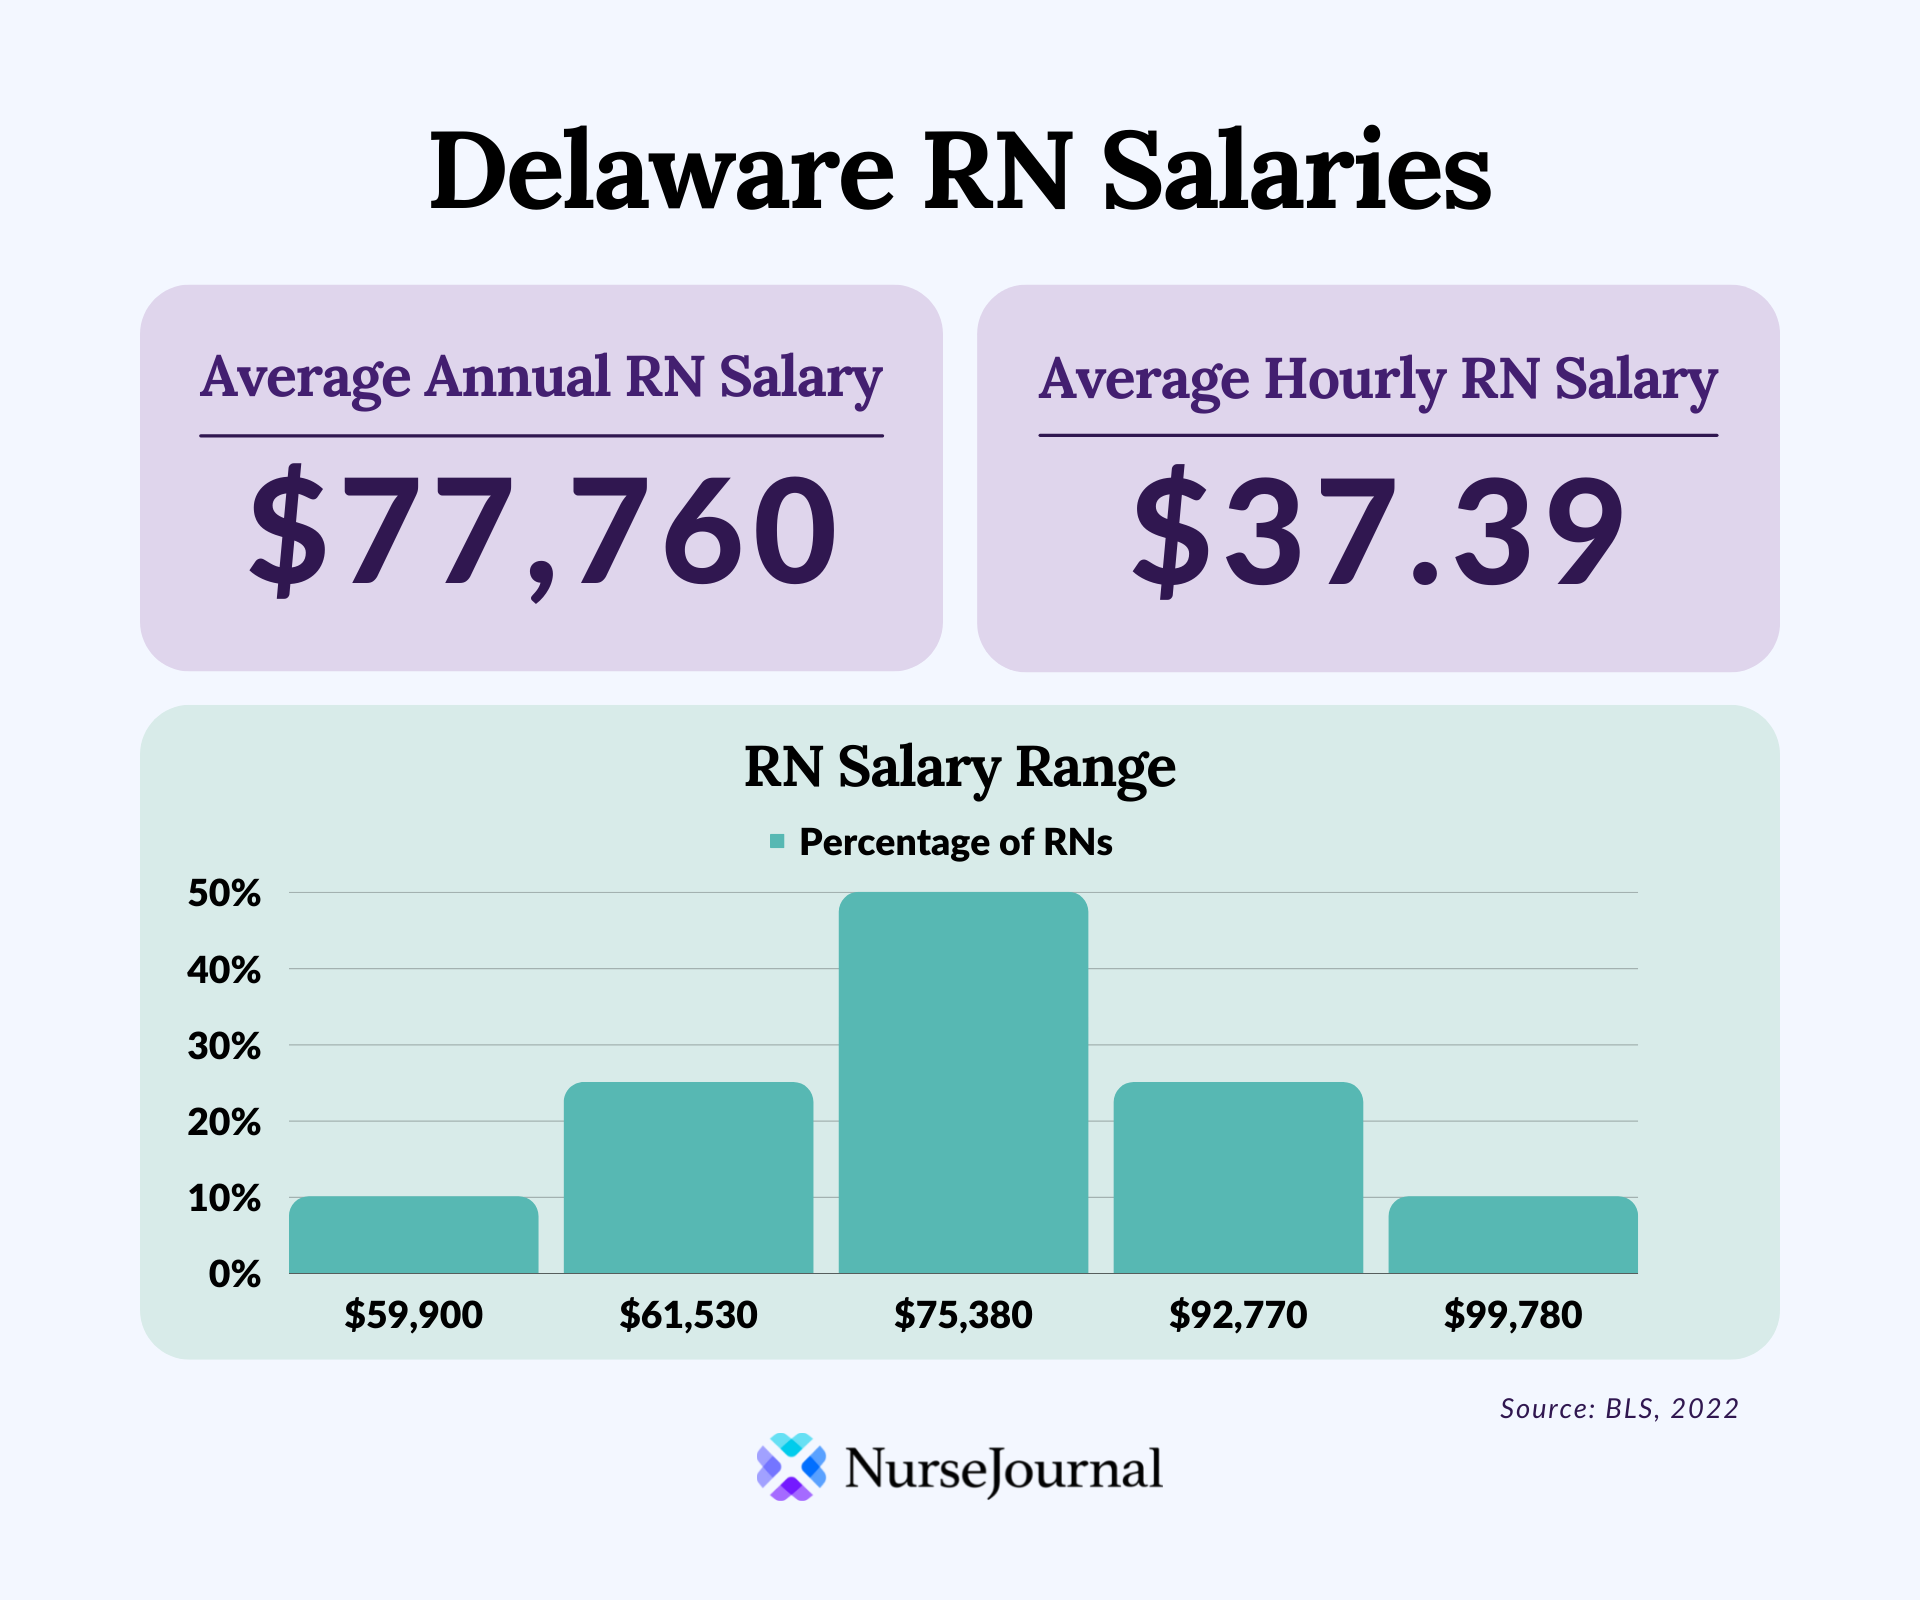 Infographic of registered nursing salary data in Delaware. The average annual RN salary is $77,760. The average hourly RN salary is $37.39. Average RN salaries range from $59,900 among the bottom 10th percentile of earners to $99,780 among the top 90th percentile of earners.